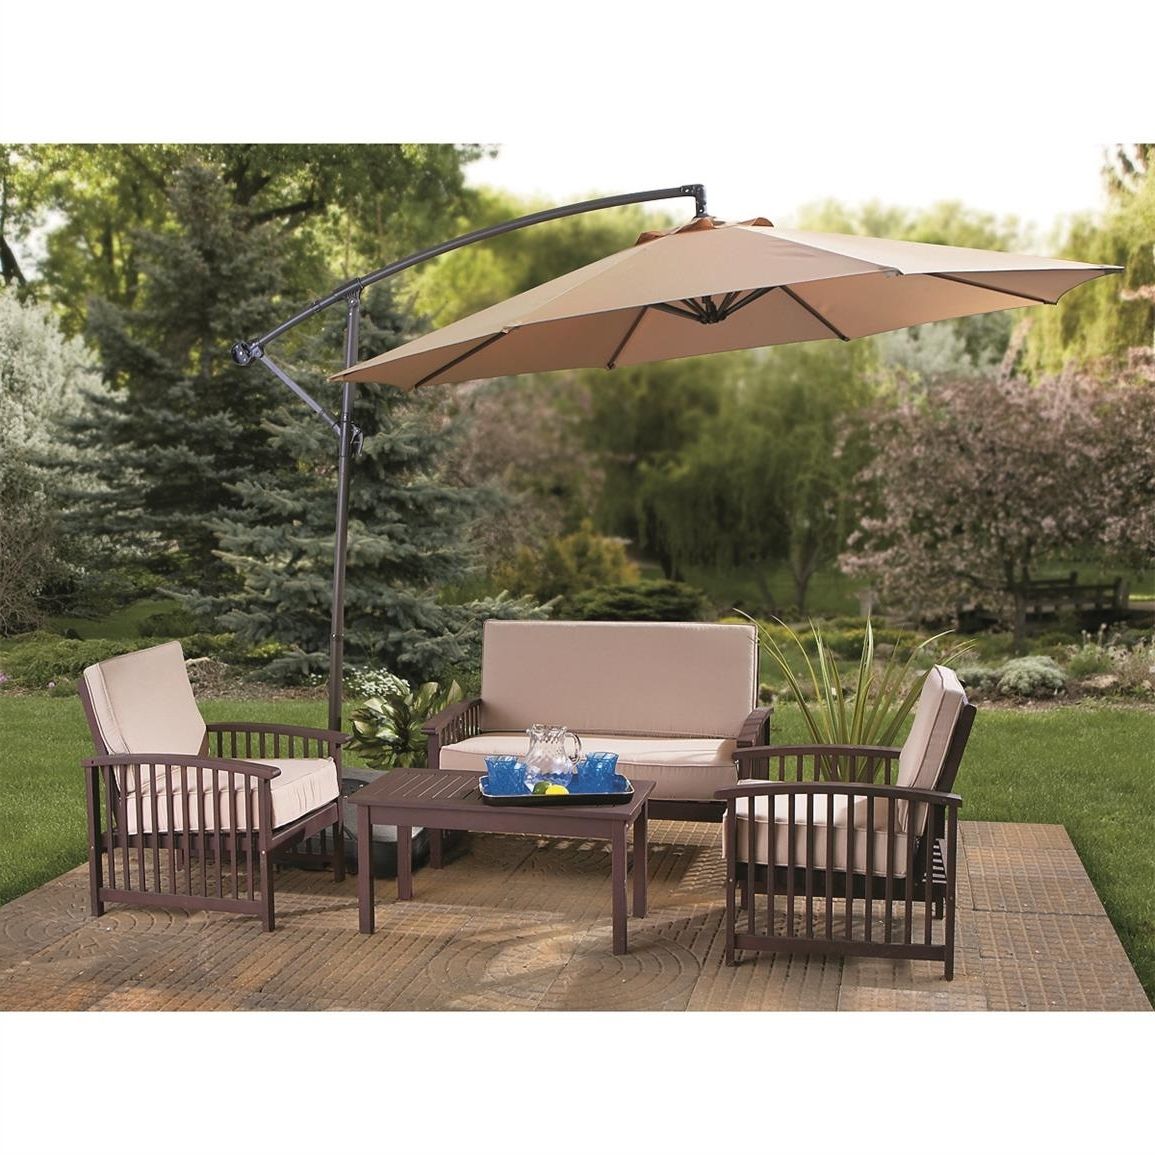 2018 Extended Patio Umbrellas With Regard To Castlecreek 10' Cantilever Patio Umbrella – 234178, Patio Umbrellas (View 1 of 20)